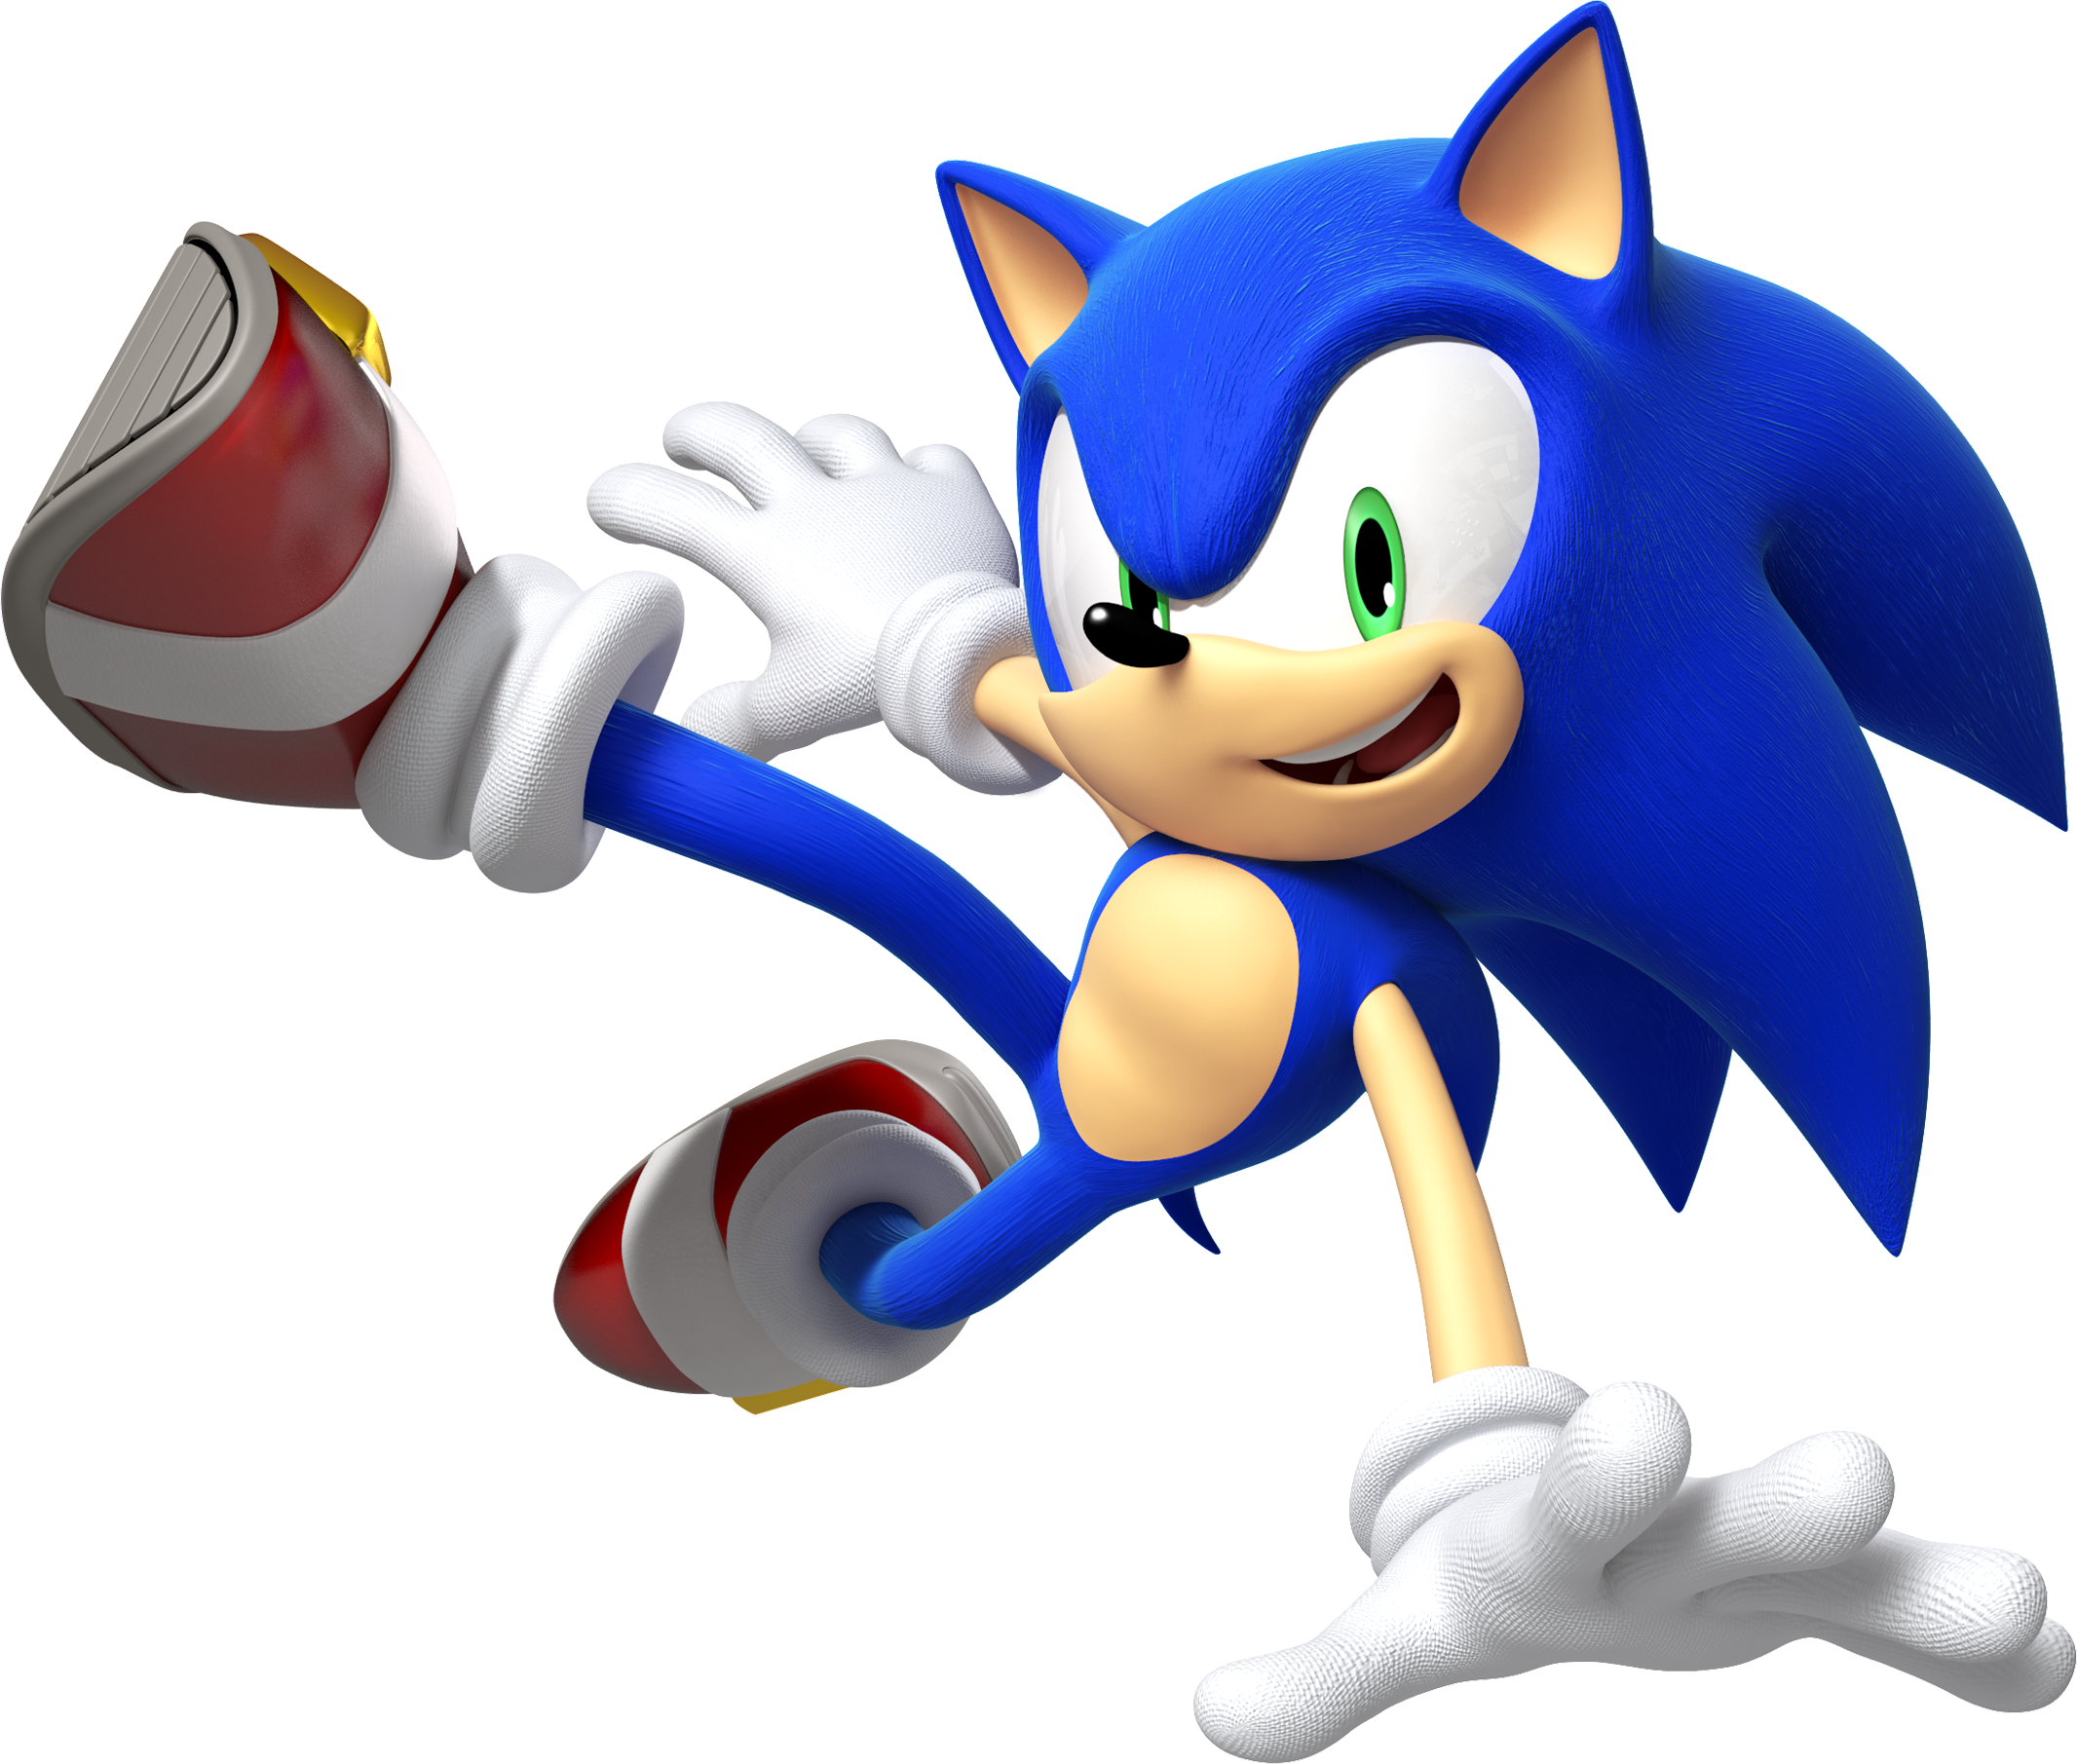 Sonic the Hedgehog 4 goes episodic this summer - GameSpot